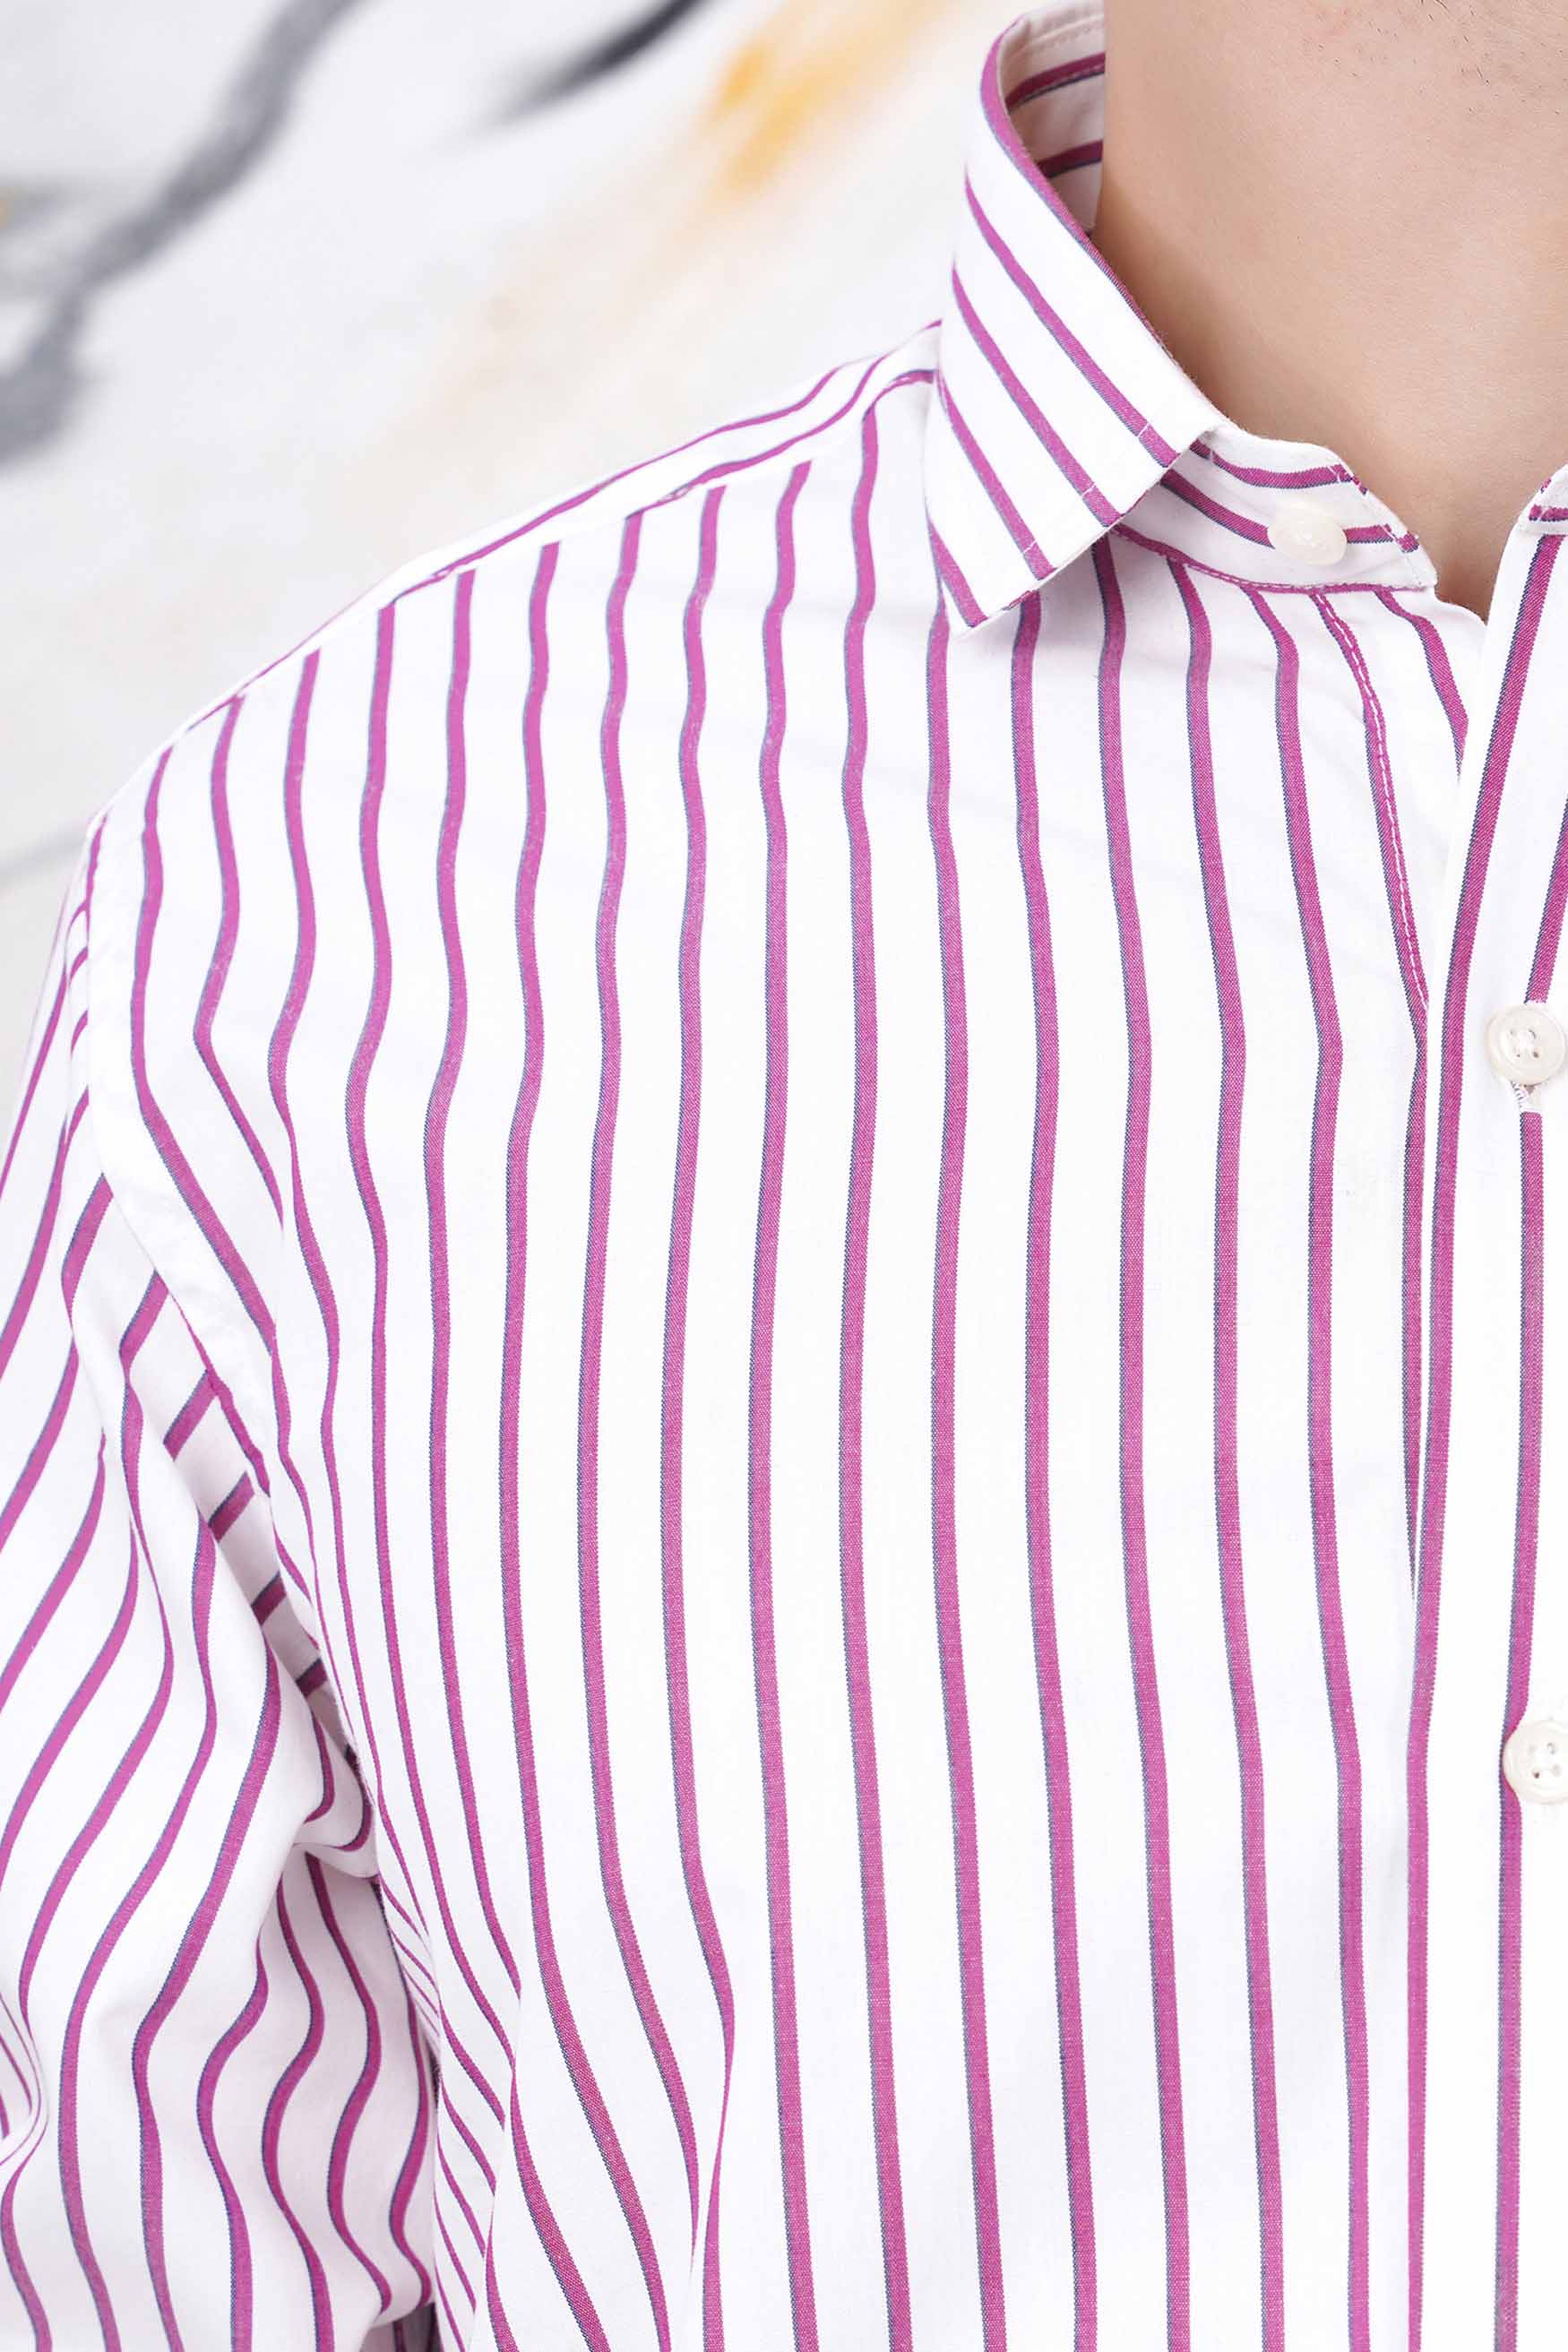 Bright White and Pansy Pink Striped Premium Cotton Shirt 11492-CA-38, 11492-CA-H-38, 11492-CA-39, 11492-CA-H-39, 11492-CA-40, 11492-CA-H-40, 11492-CA-42, 11492-CA-H-42, 11492-CA-44, 11492-CA-H-44, 11492-CA-46, 11492-CA-H-46, 11492-CA-48, 11492-CA-H-48, 11492-CA-50, 11492-CA-H-50, 11492-CA-52, 11492-CA-H-52